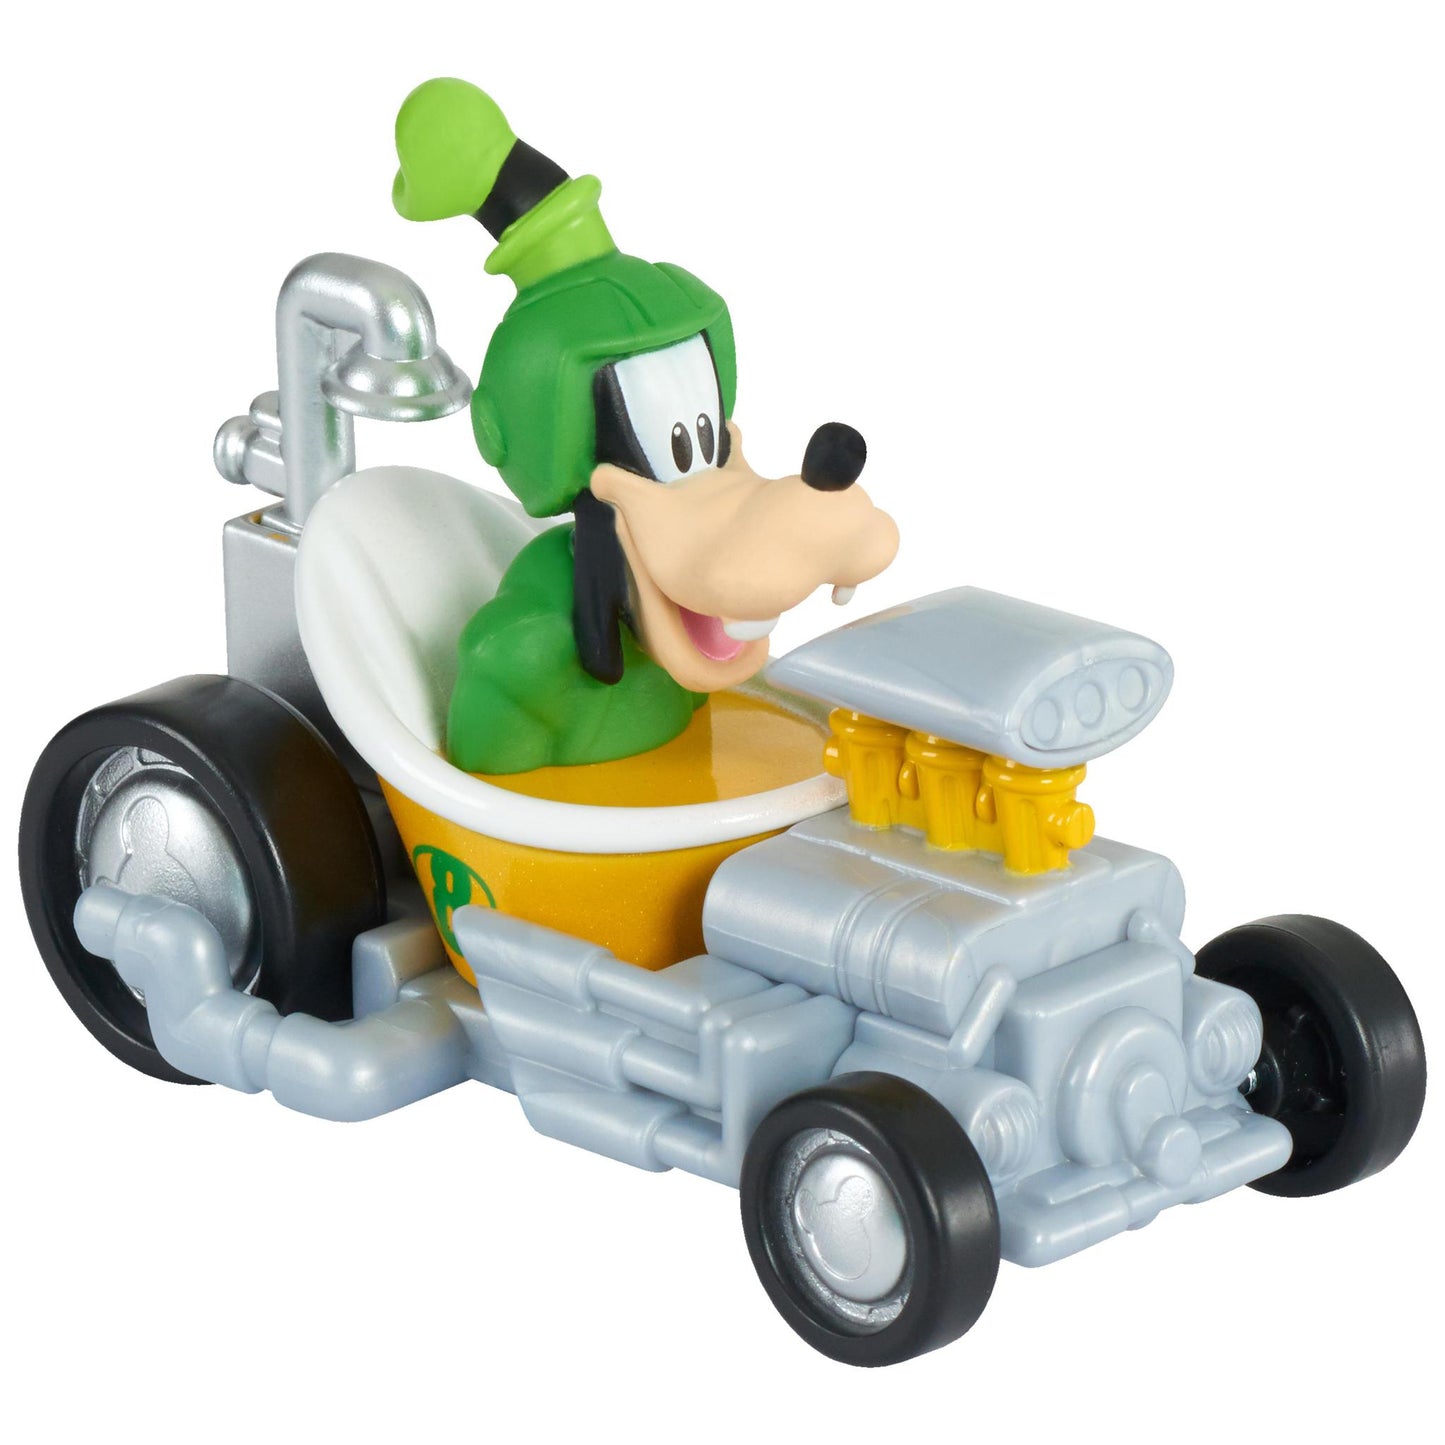 Disney Mickey Mouse Die Cast Vehicle - Goofy's Roadster